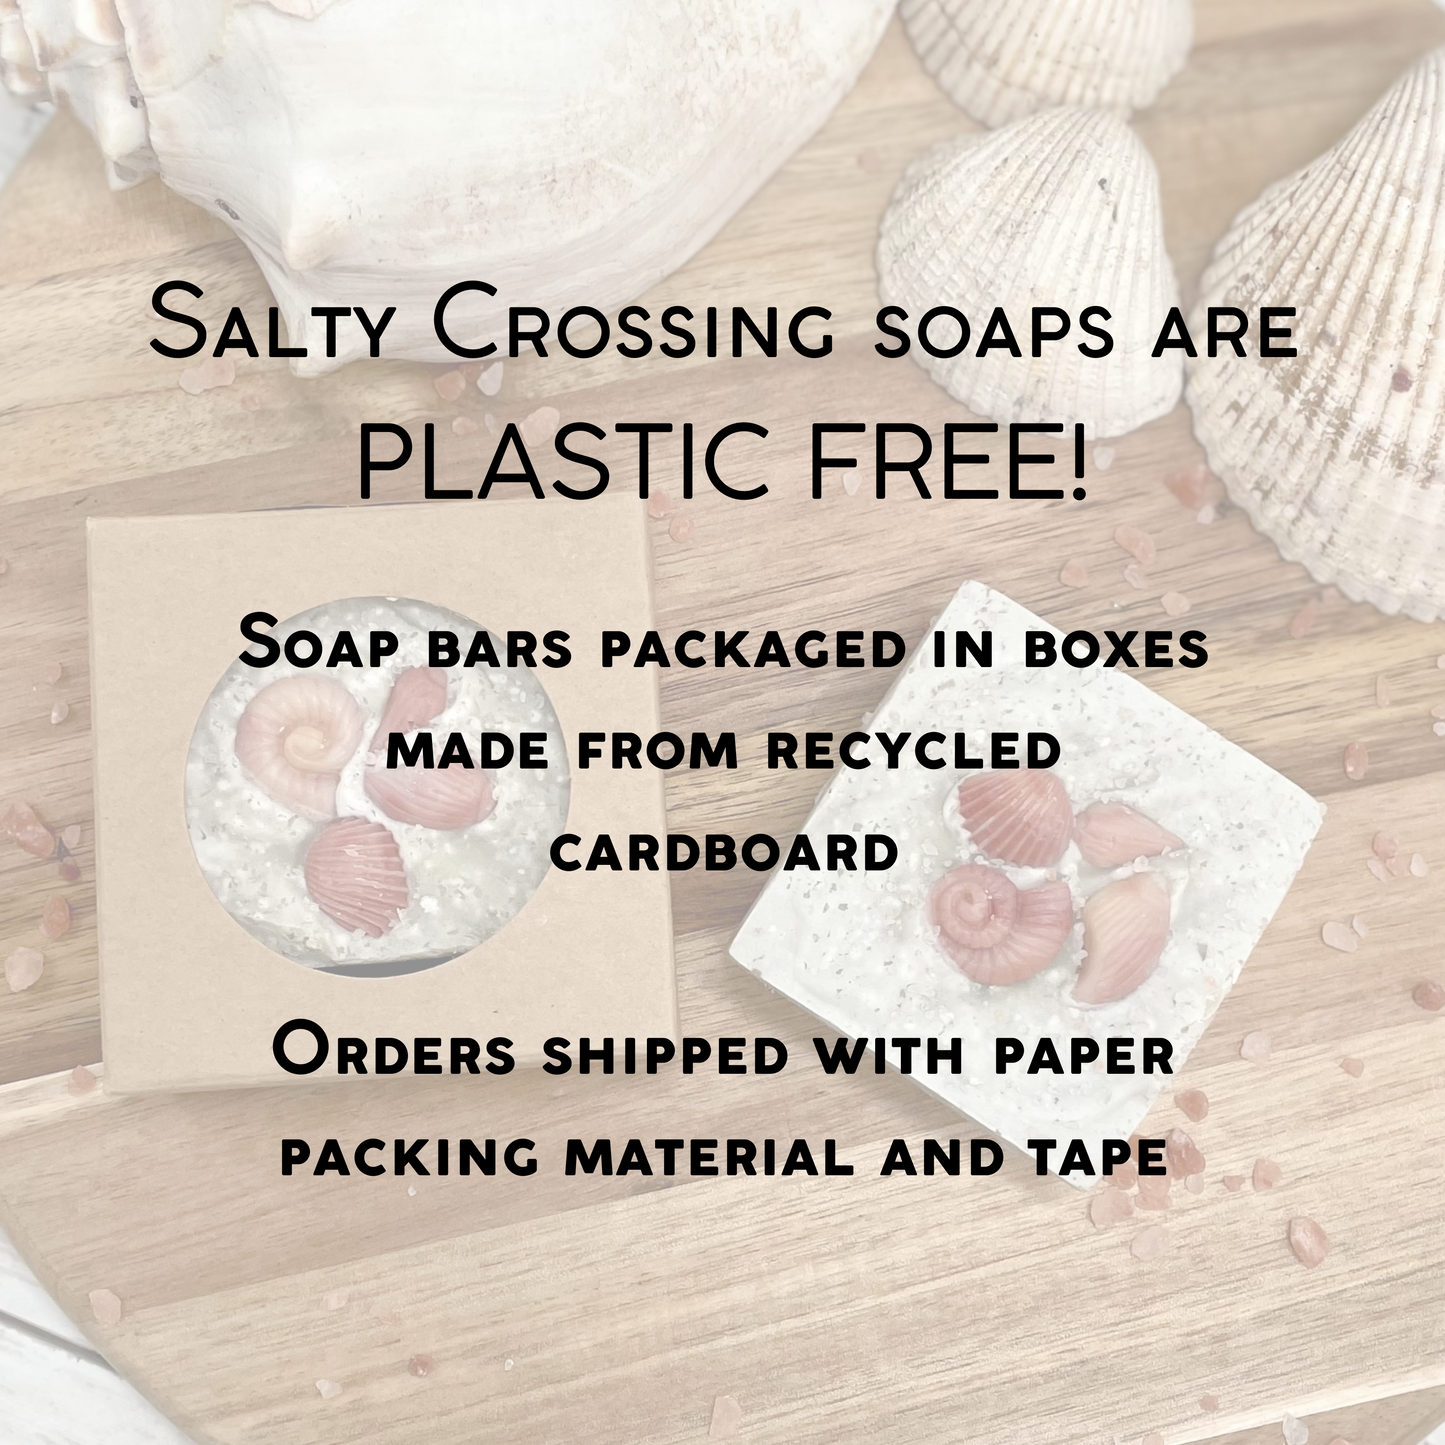 graphic: Salty Crossing soaps are plastic free! soap bars packaged in boxes made from recycled cardboard. orders shipped with paper packing material and tape.